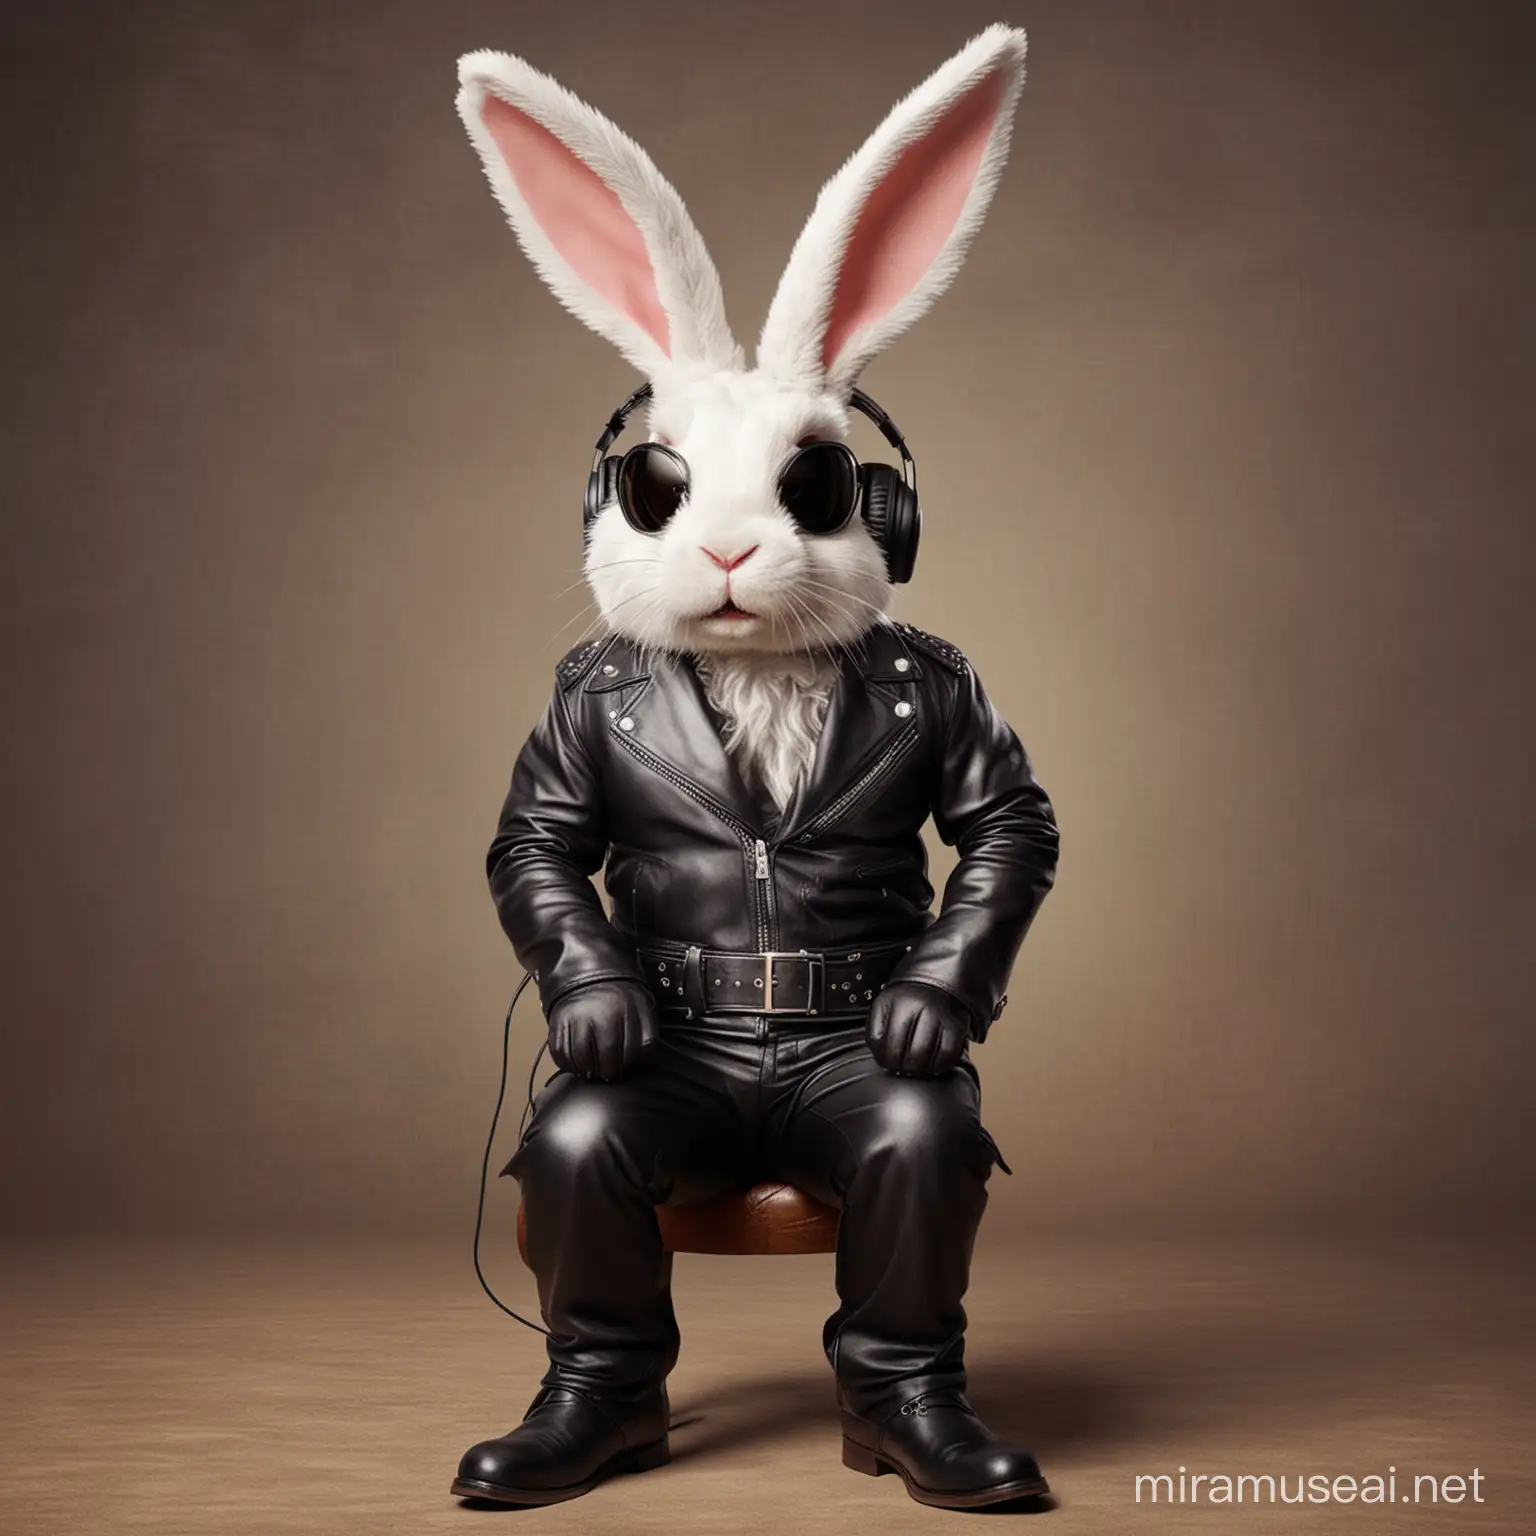 Easter Bunny Rocking Leather Attire with Musical Vibes